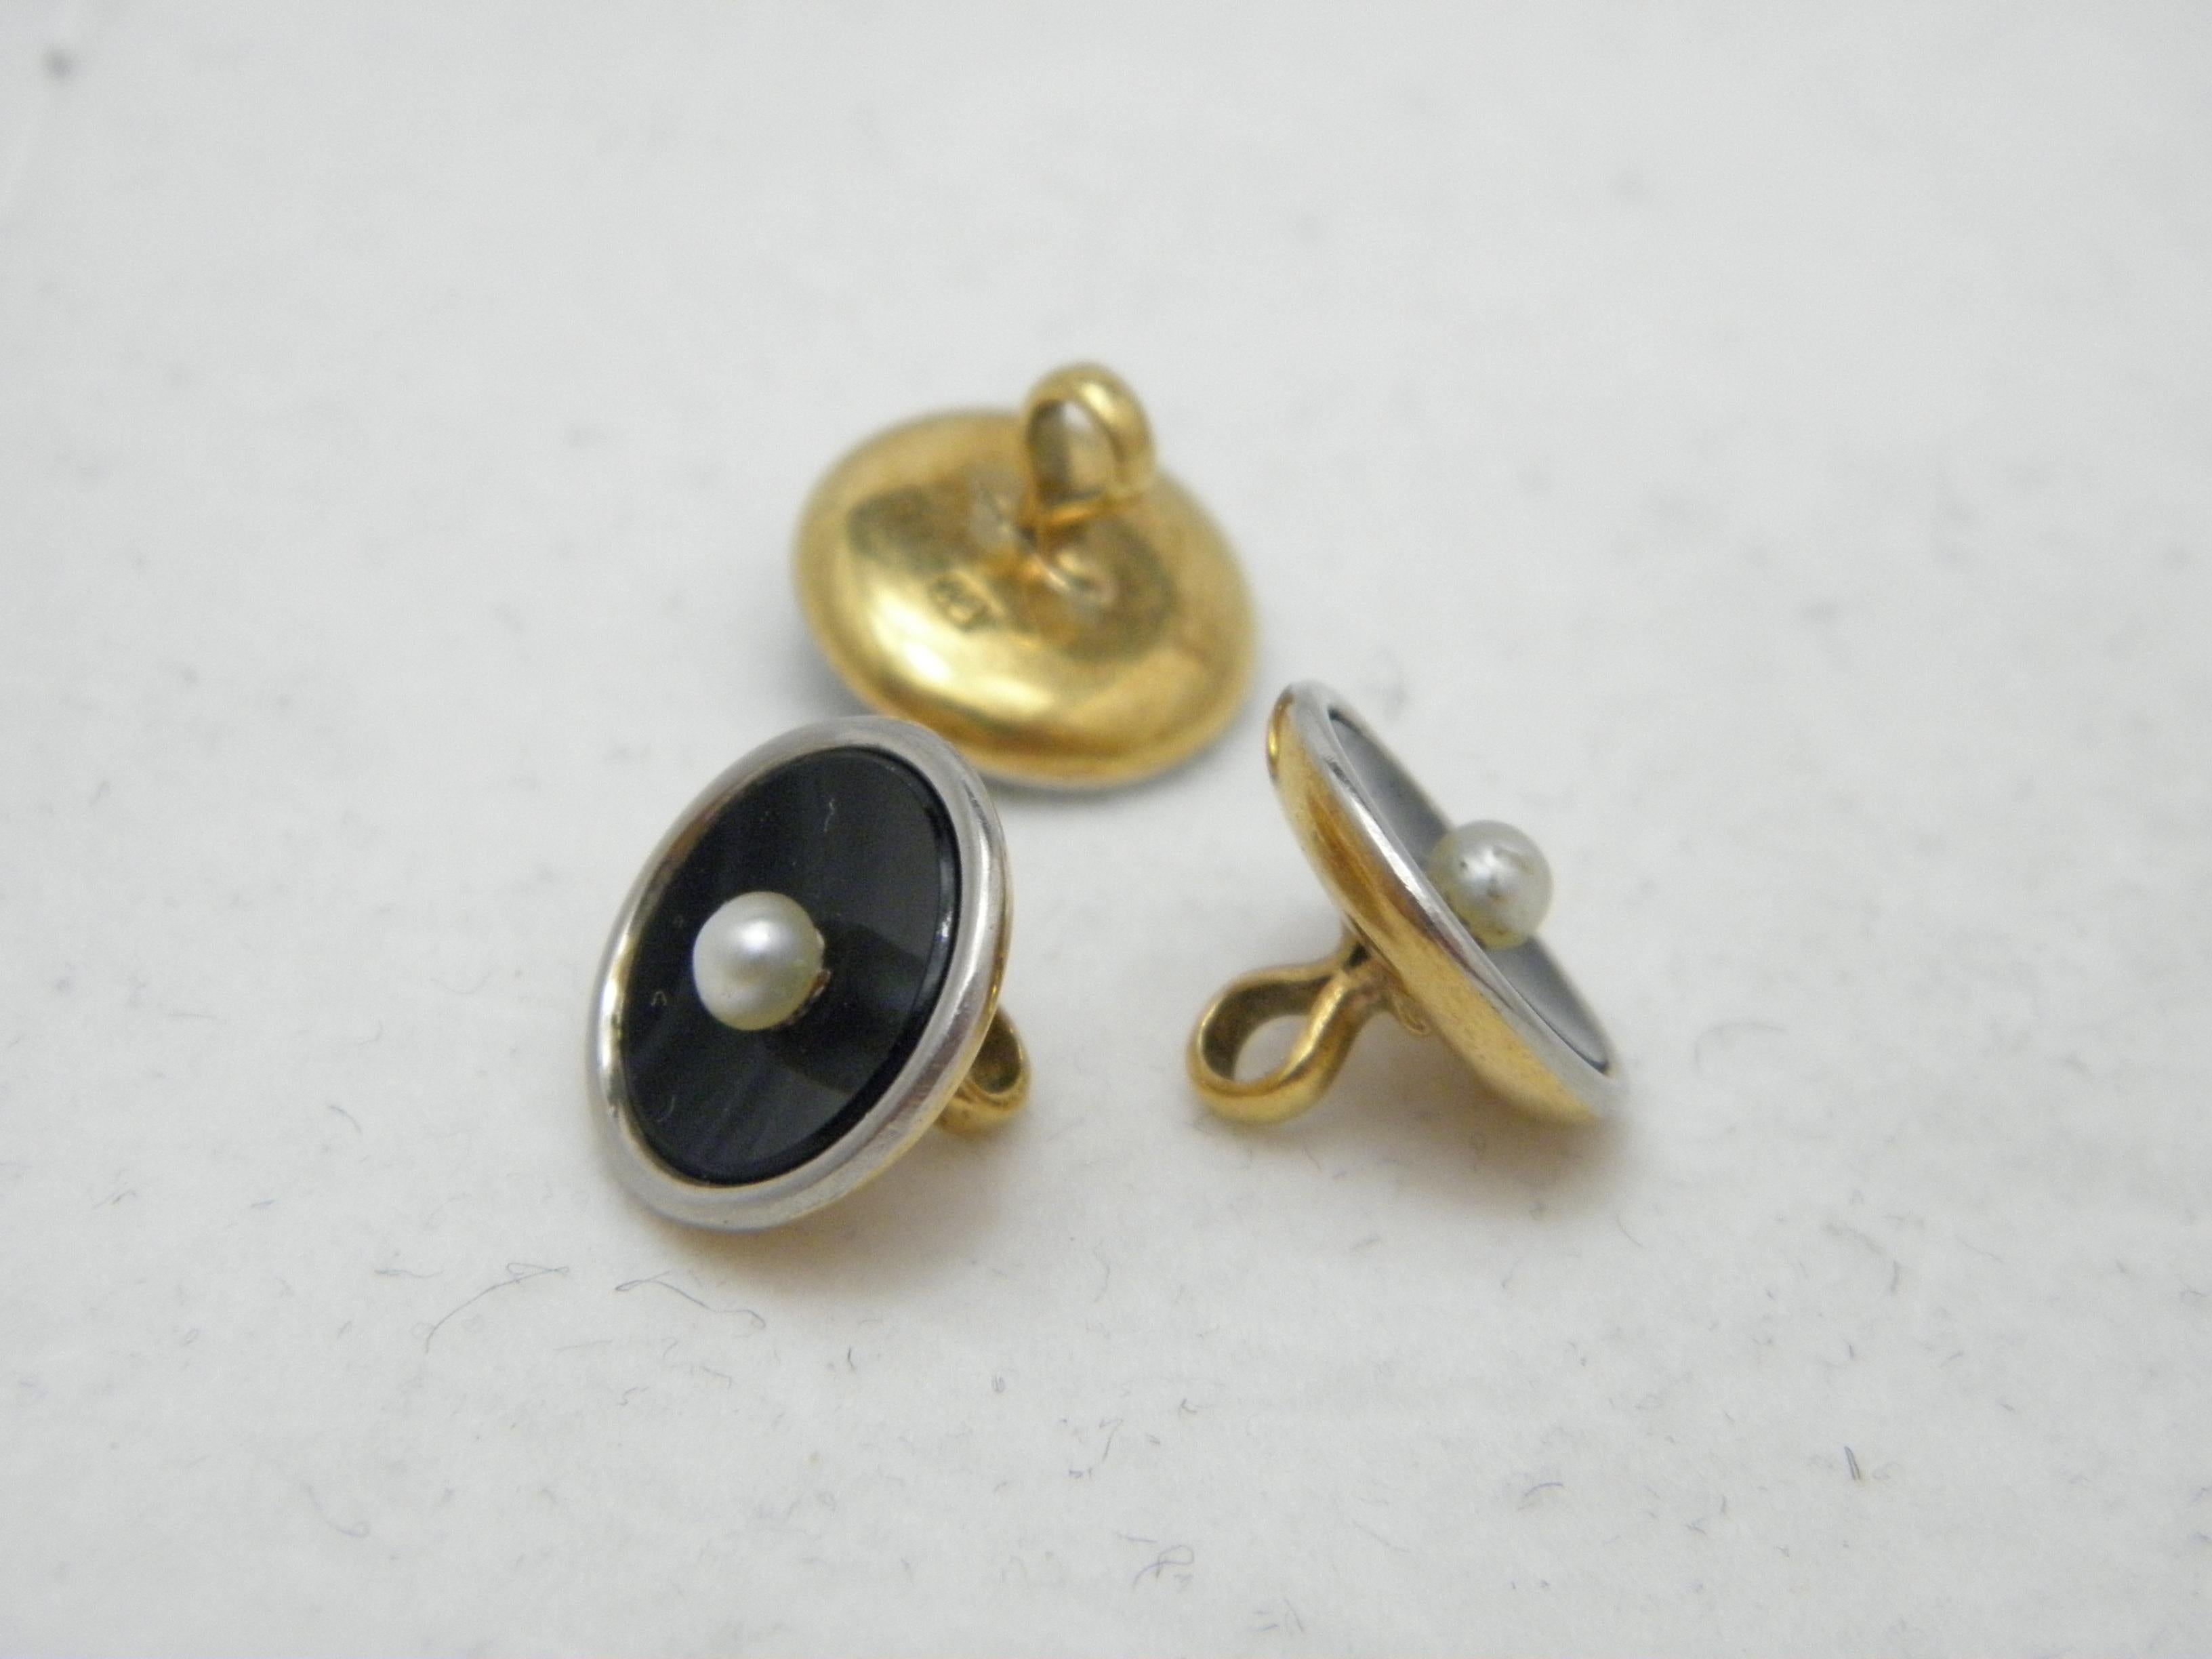 Antique 18ct Gold Platinum Pearl Shirt Studs Buttons c1860 750 Purity Heavy 4.9g For Sale 2